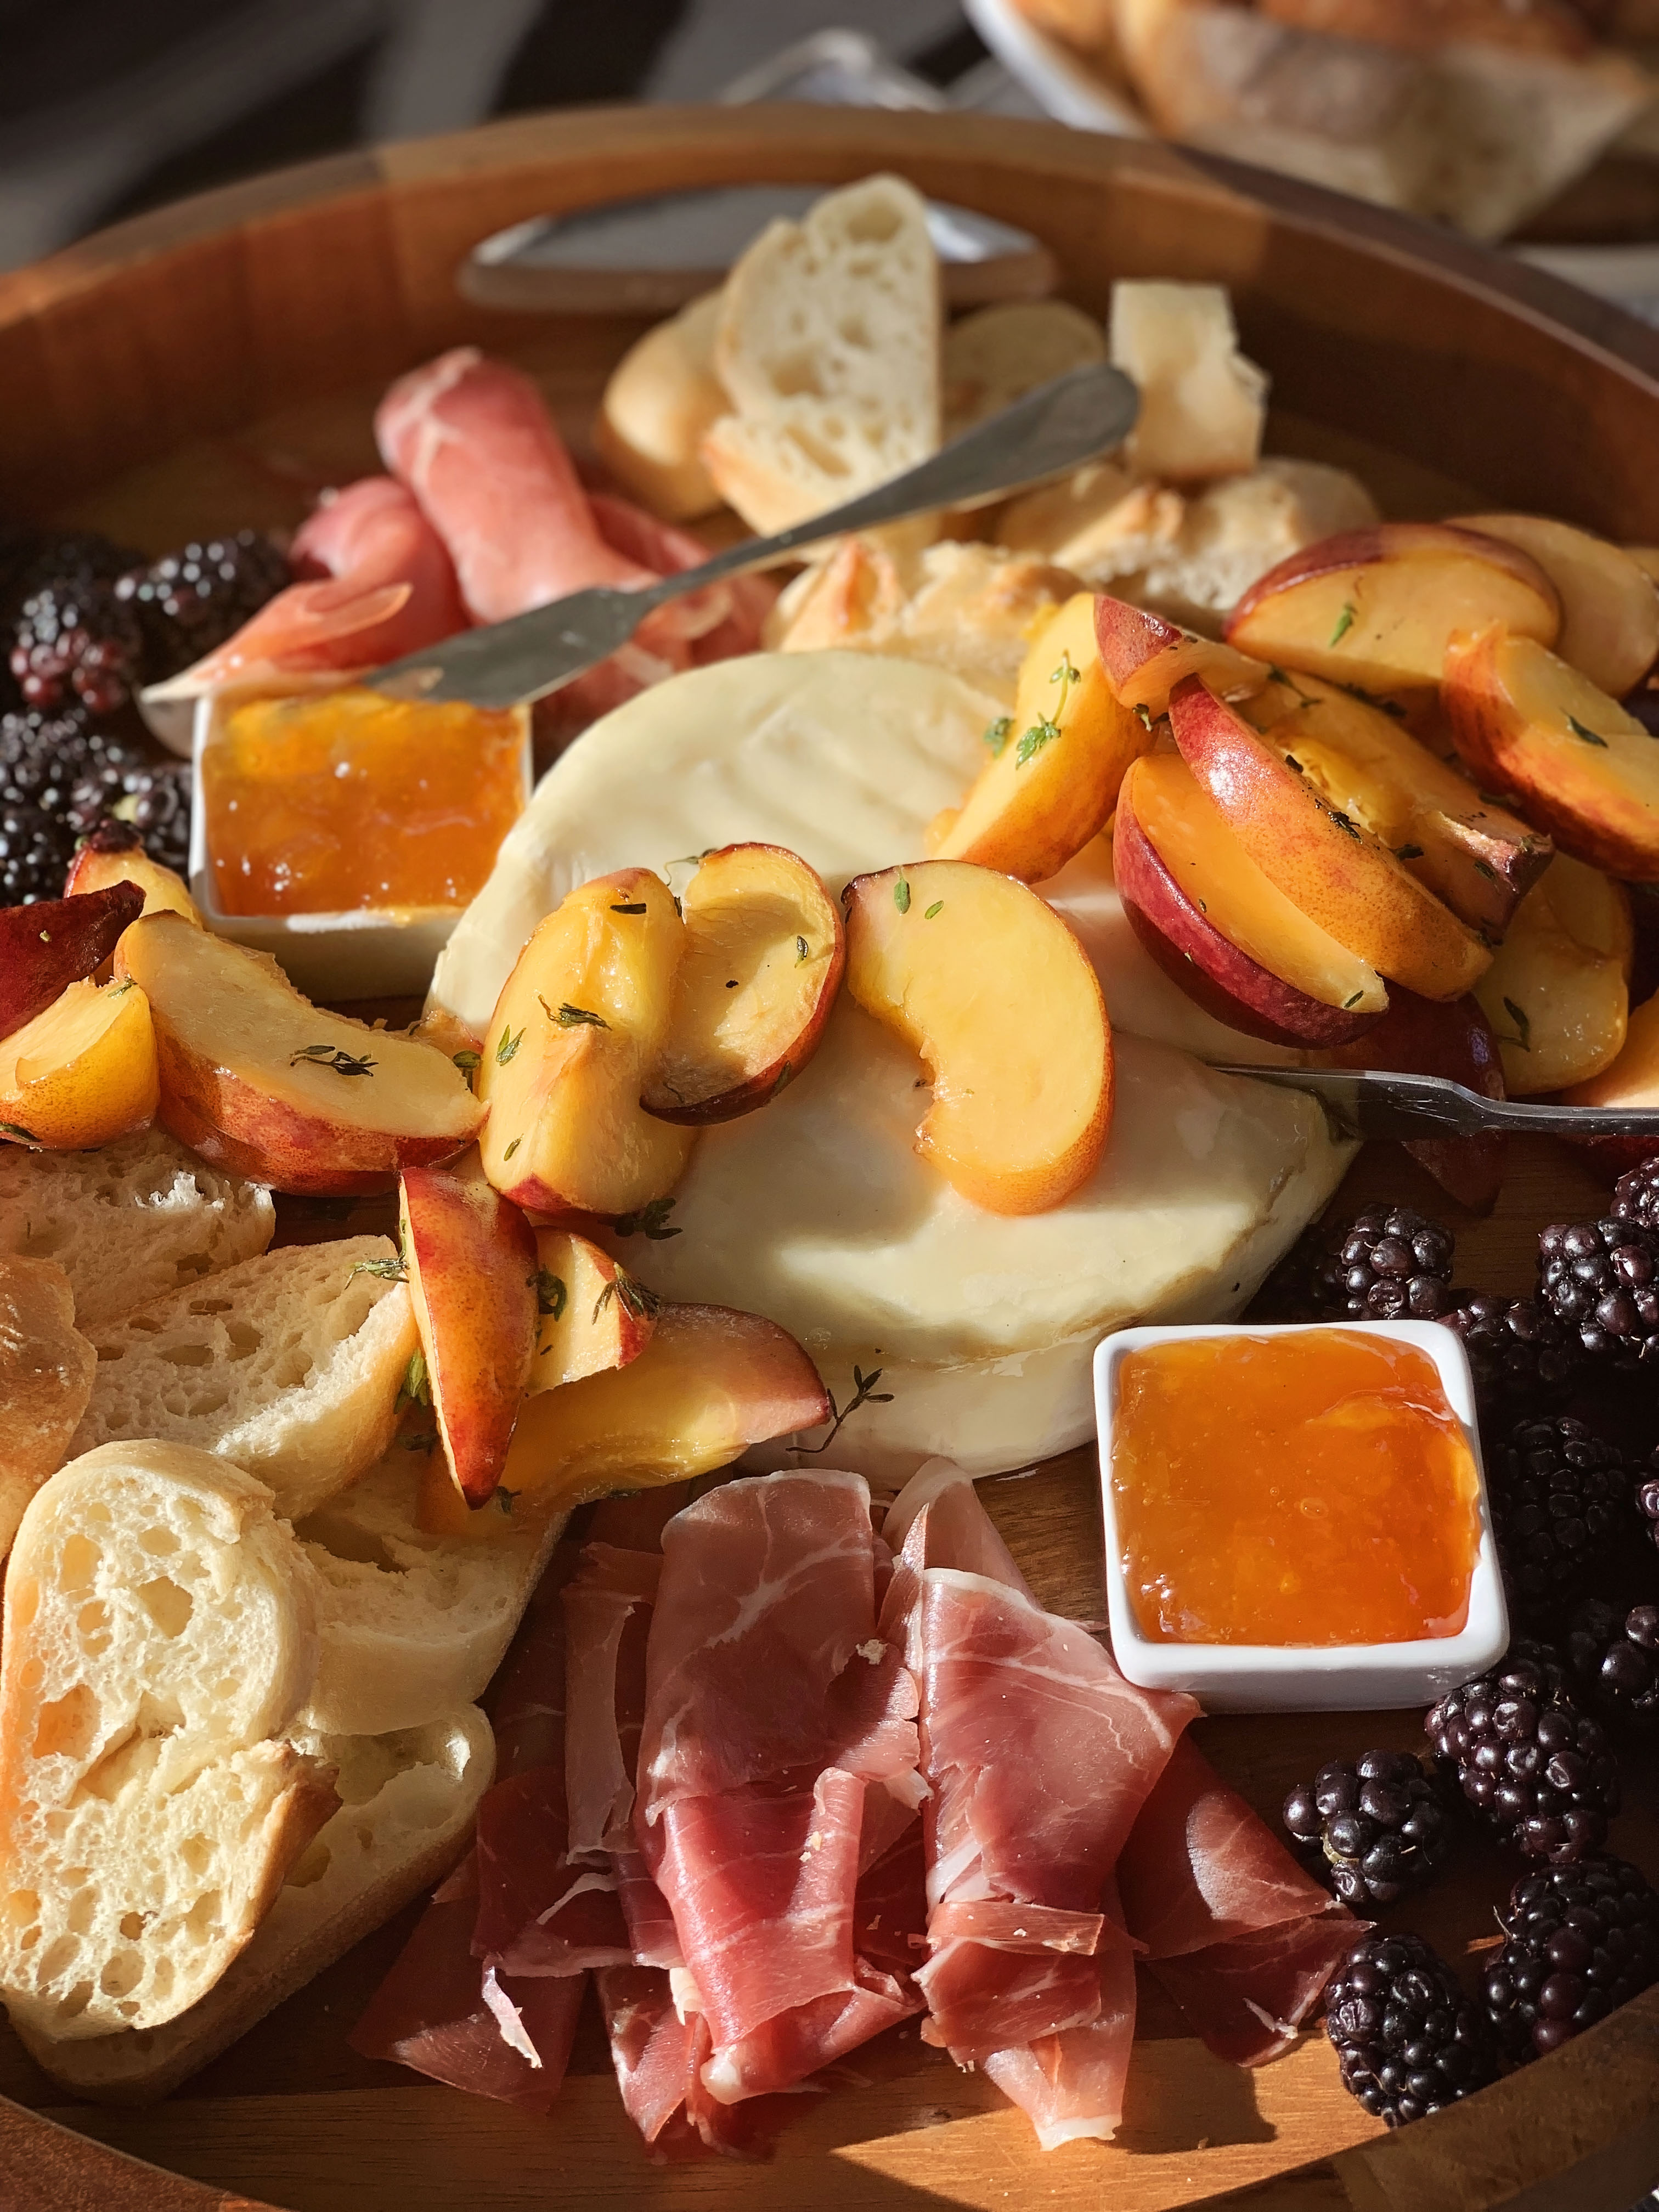 https://www.awellcraftedparty.com/wp-content/uploads/2019/06/Grilled-Peaches-and-Brie-04.jpg